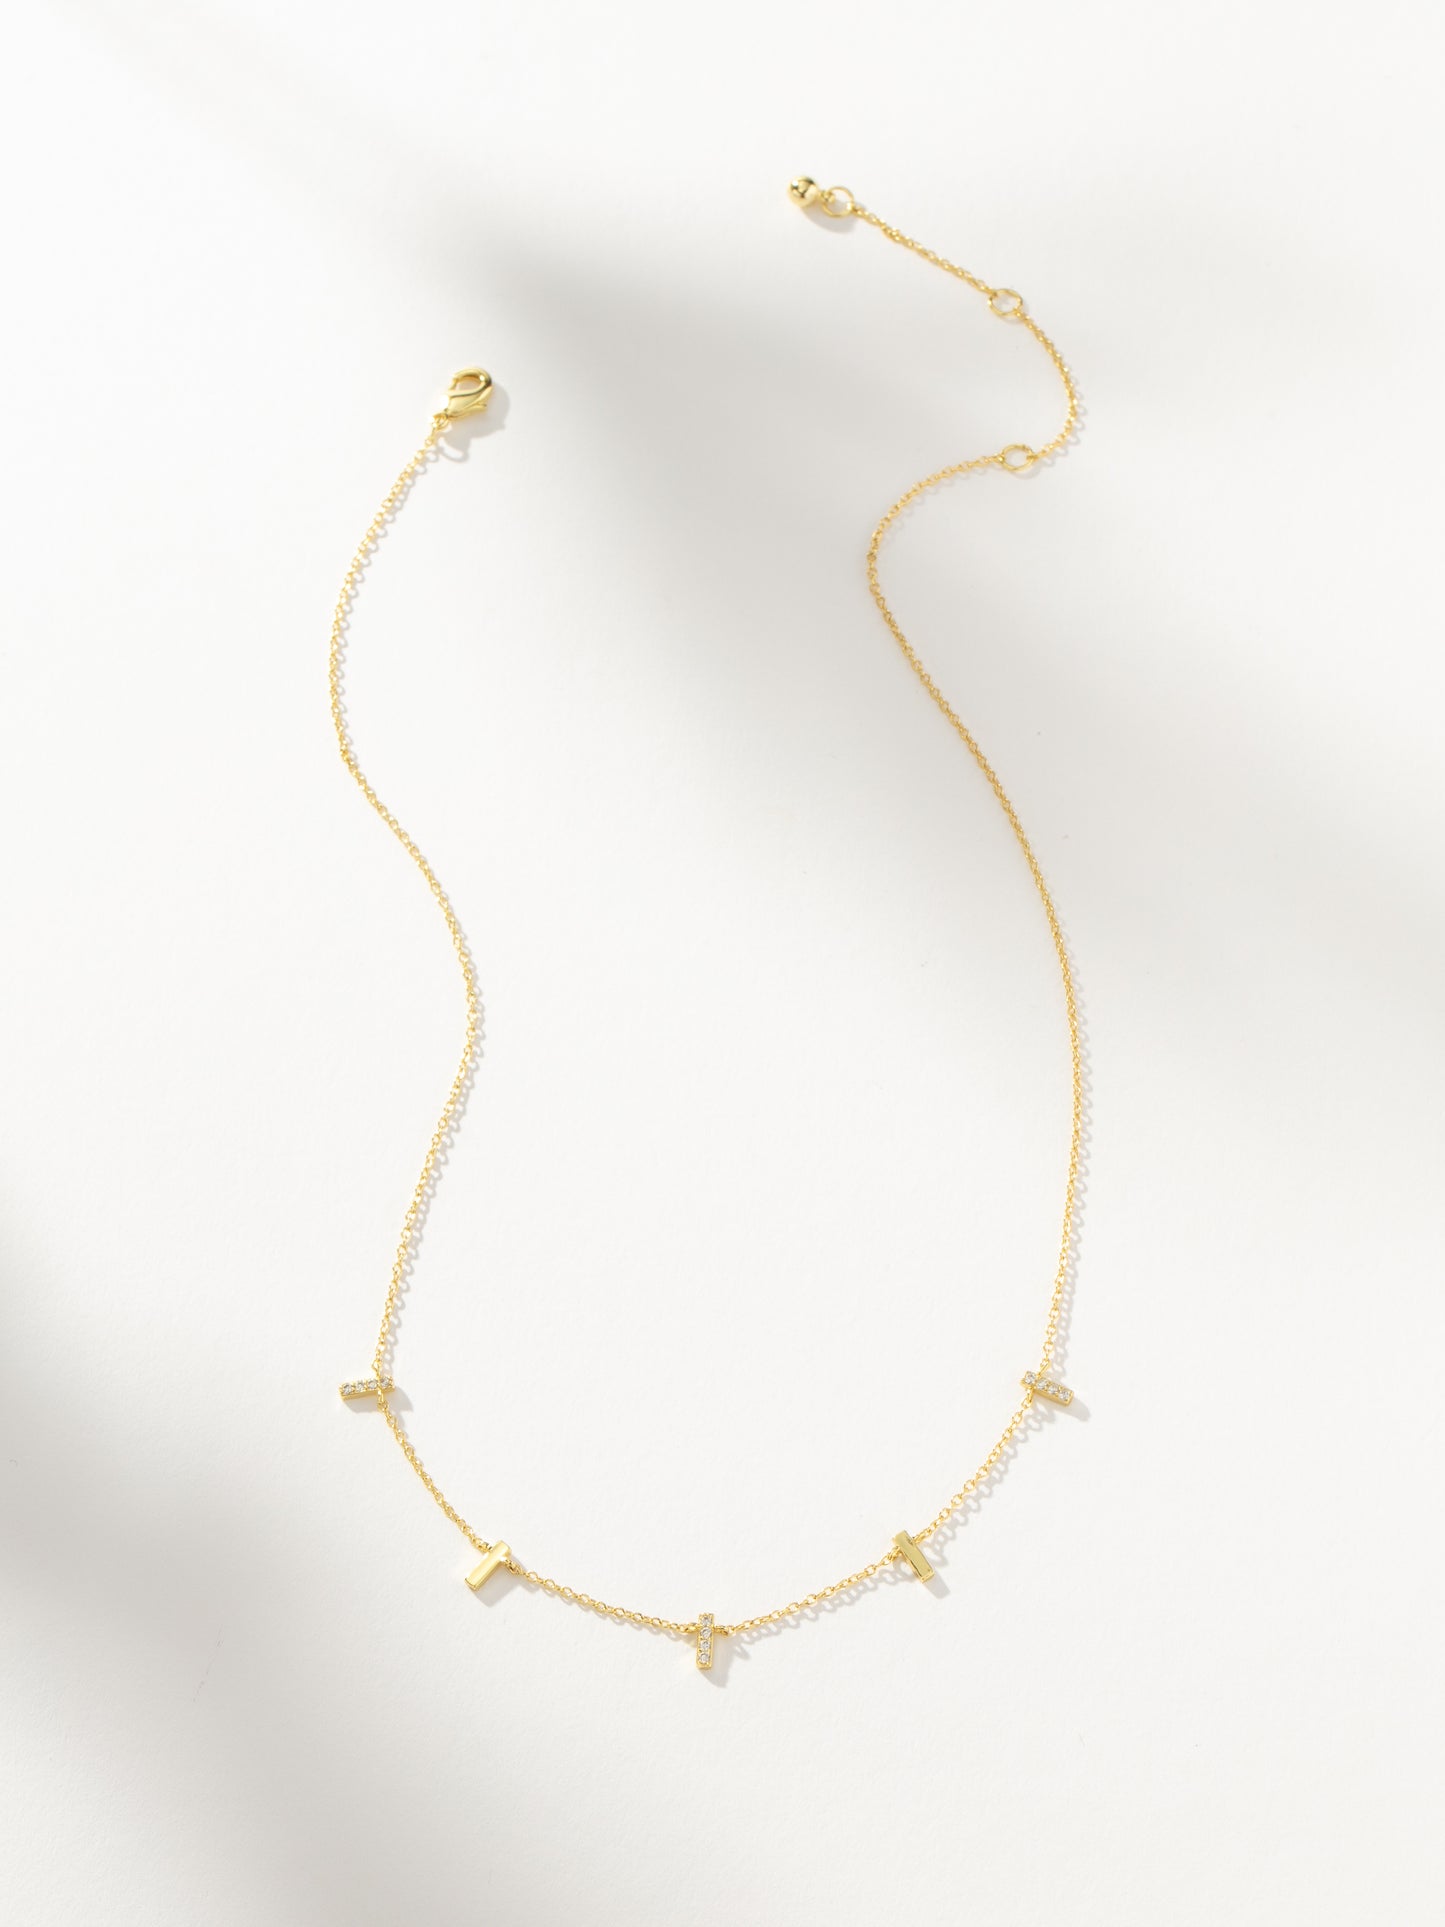 Countess Necklace | Gold | Product Image | Uncommon James